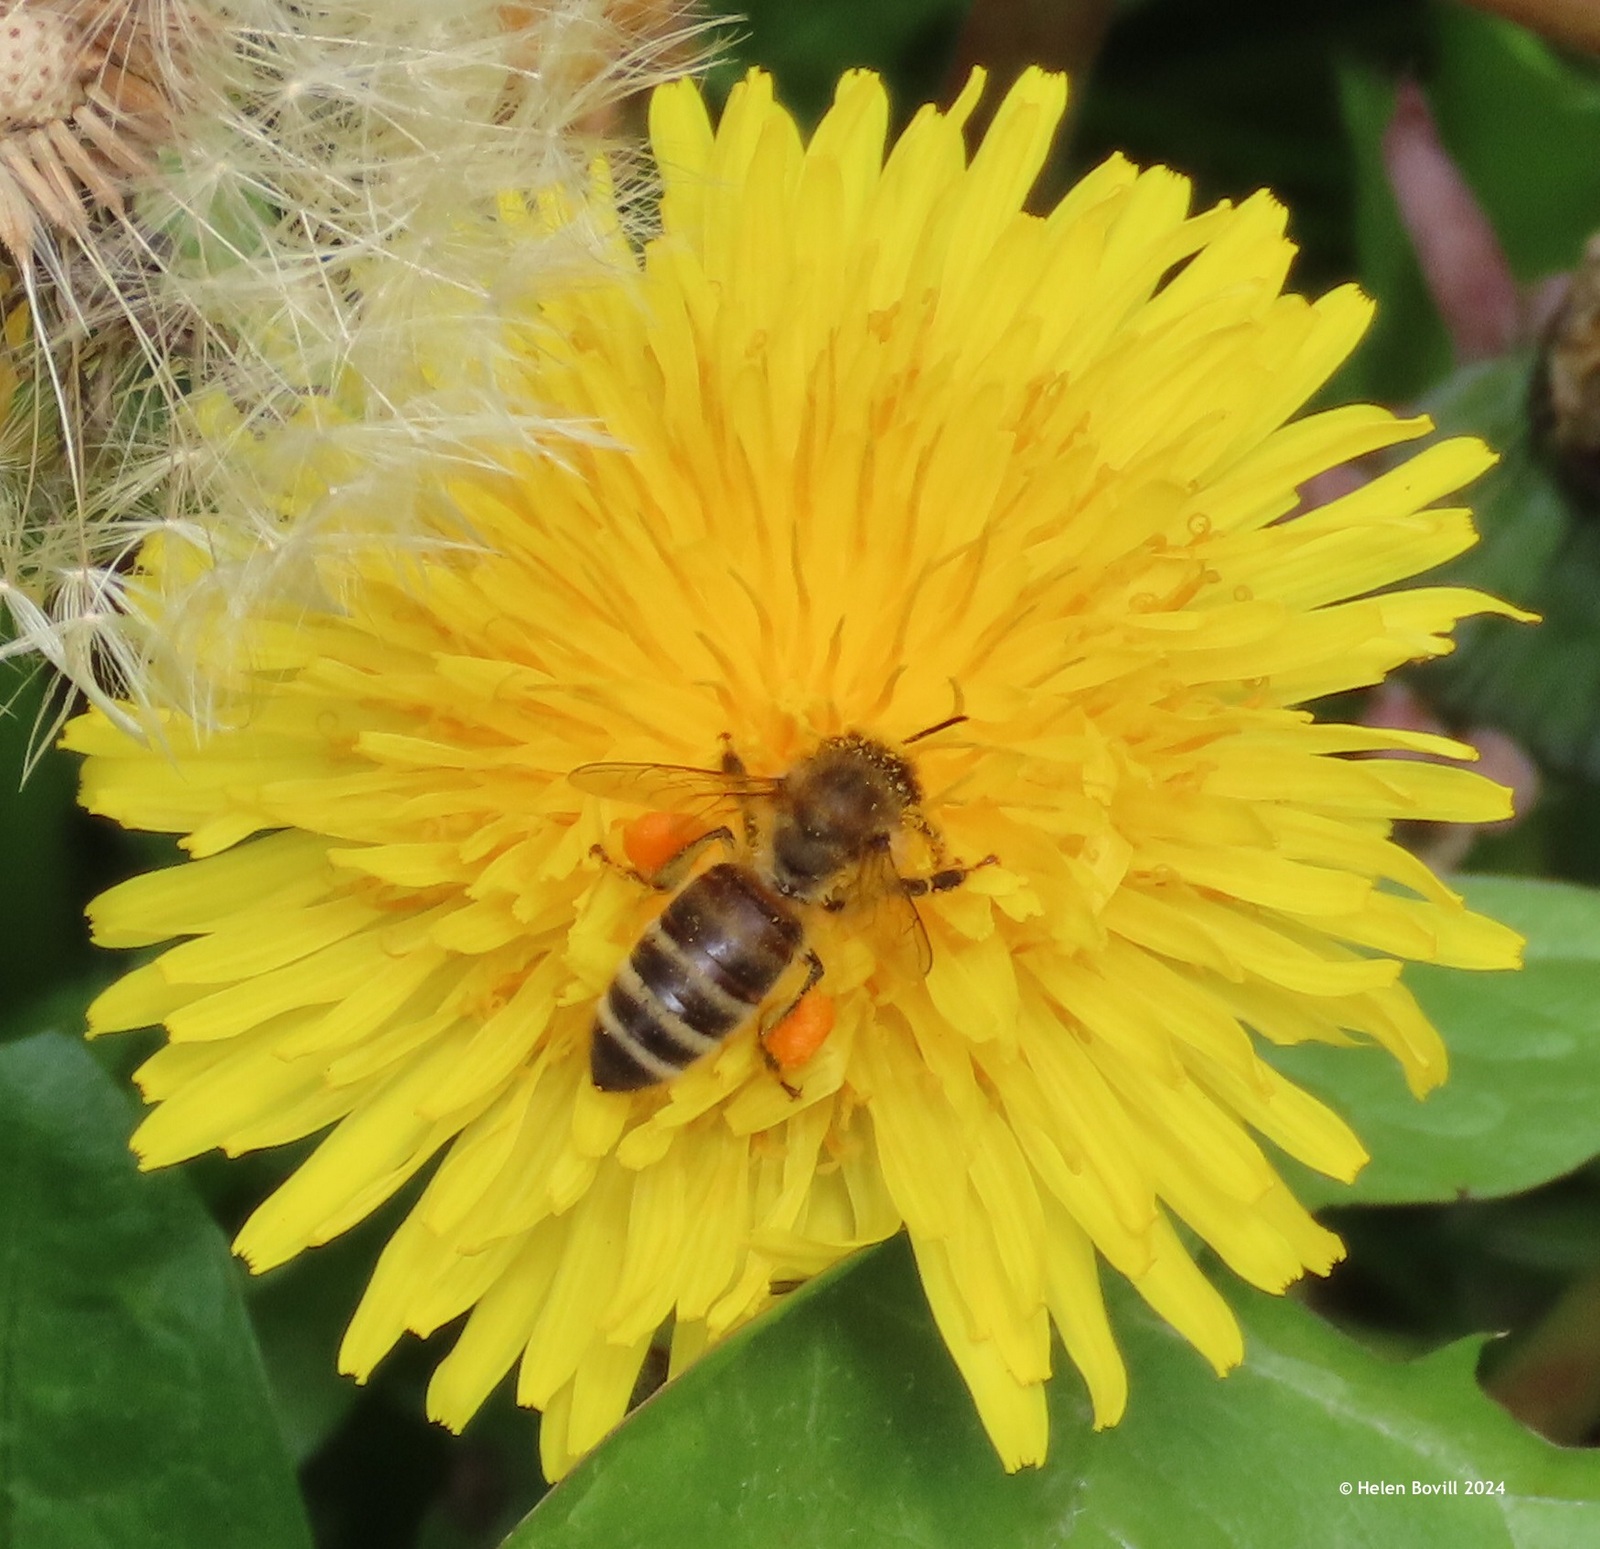 A honey bee on a dandelion in the cemetery